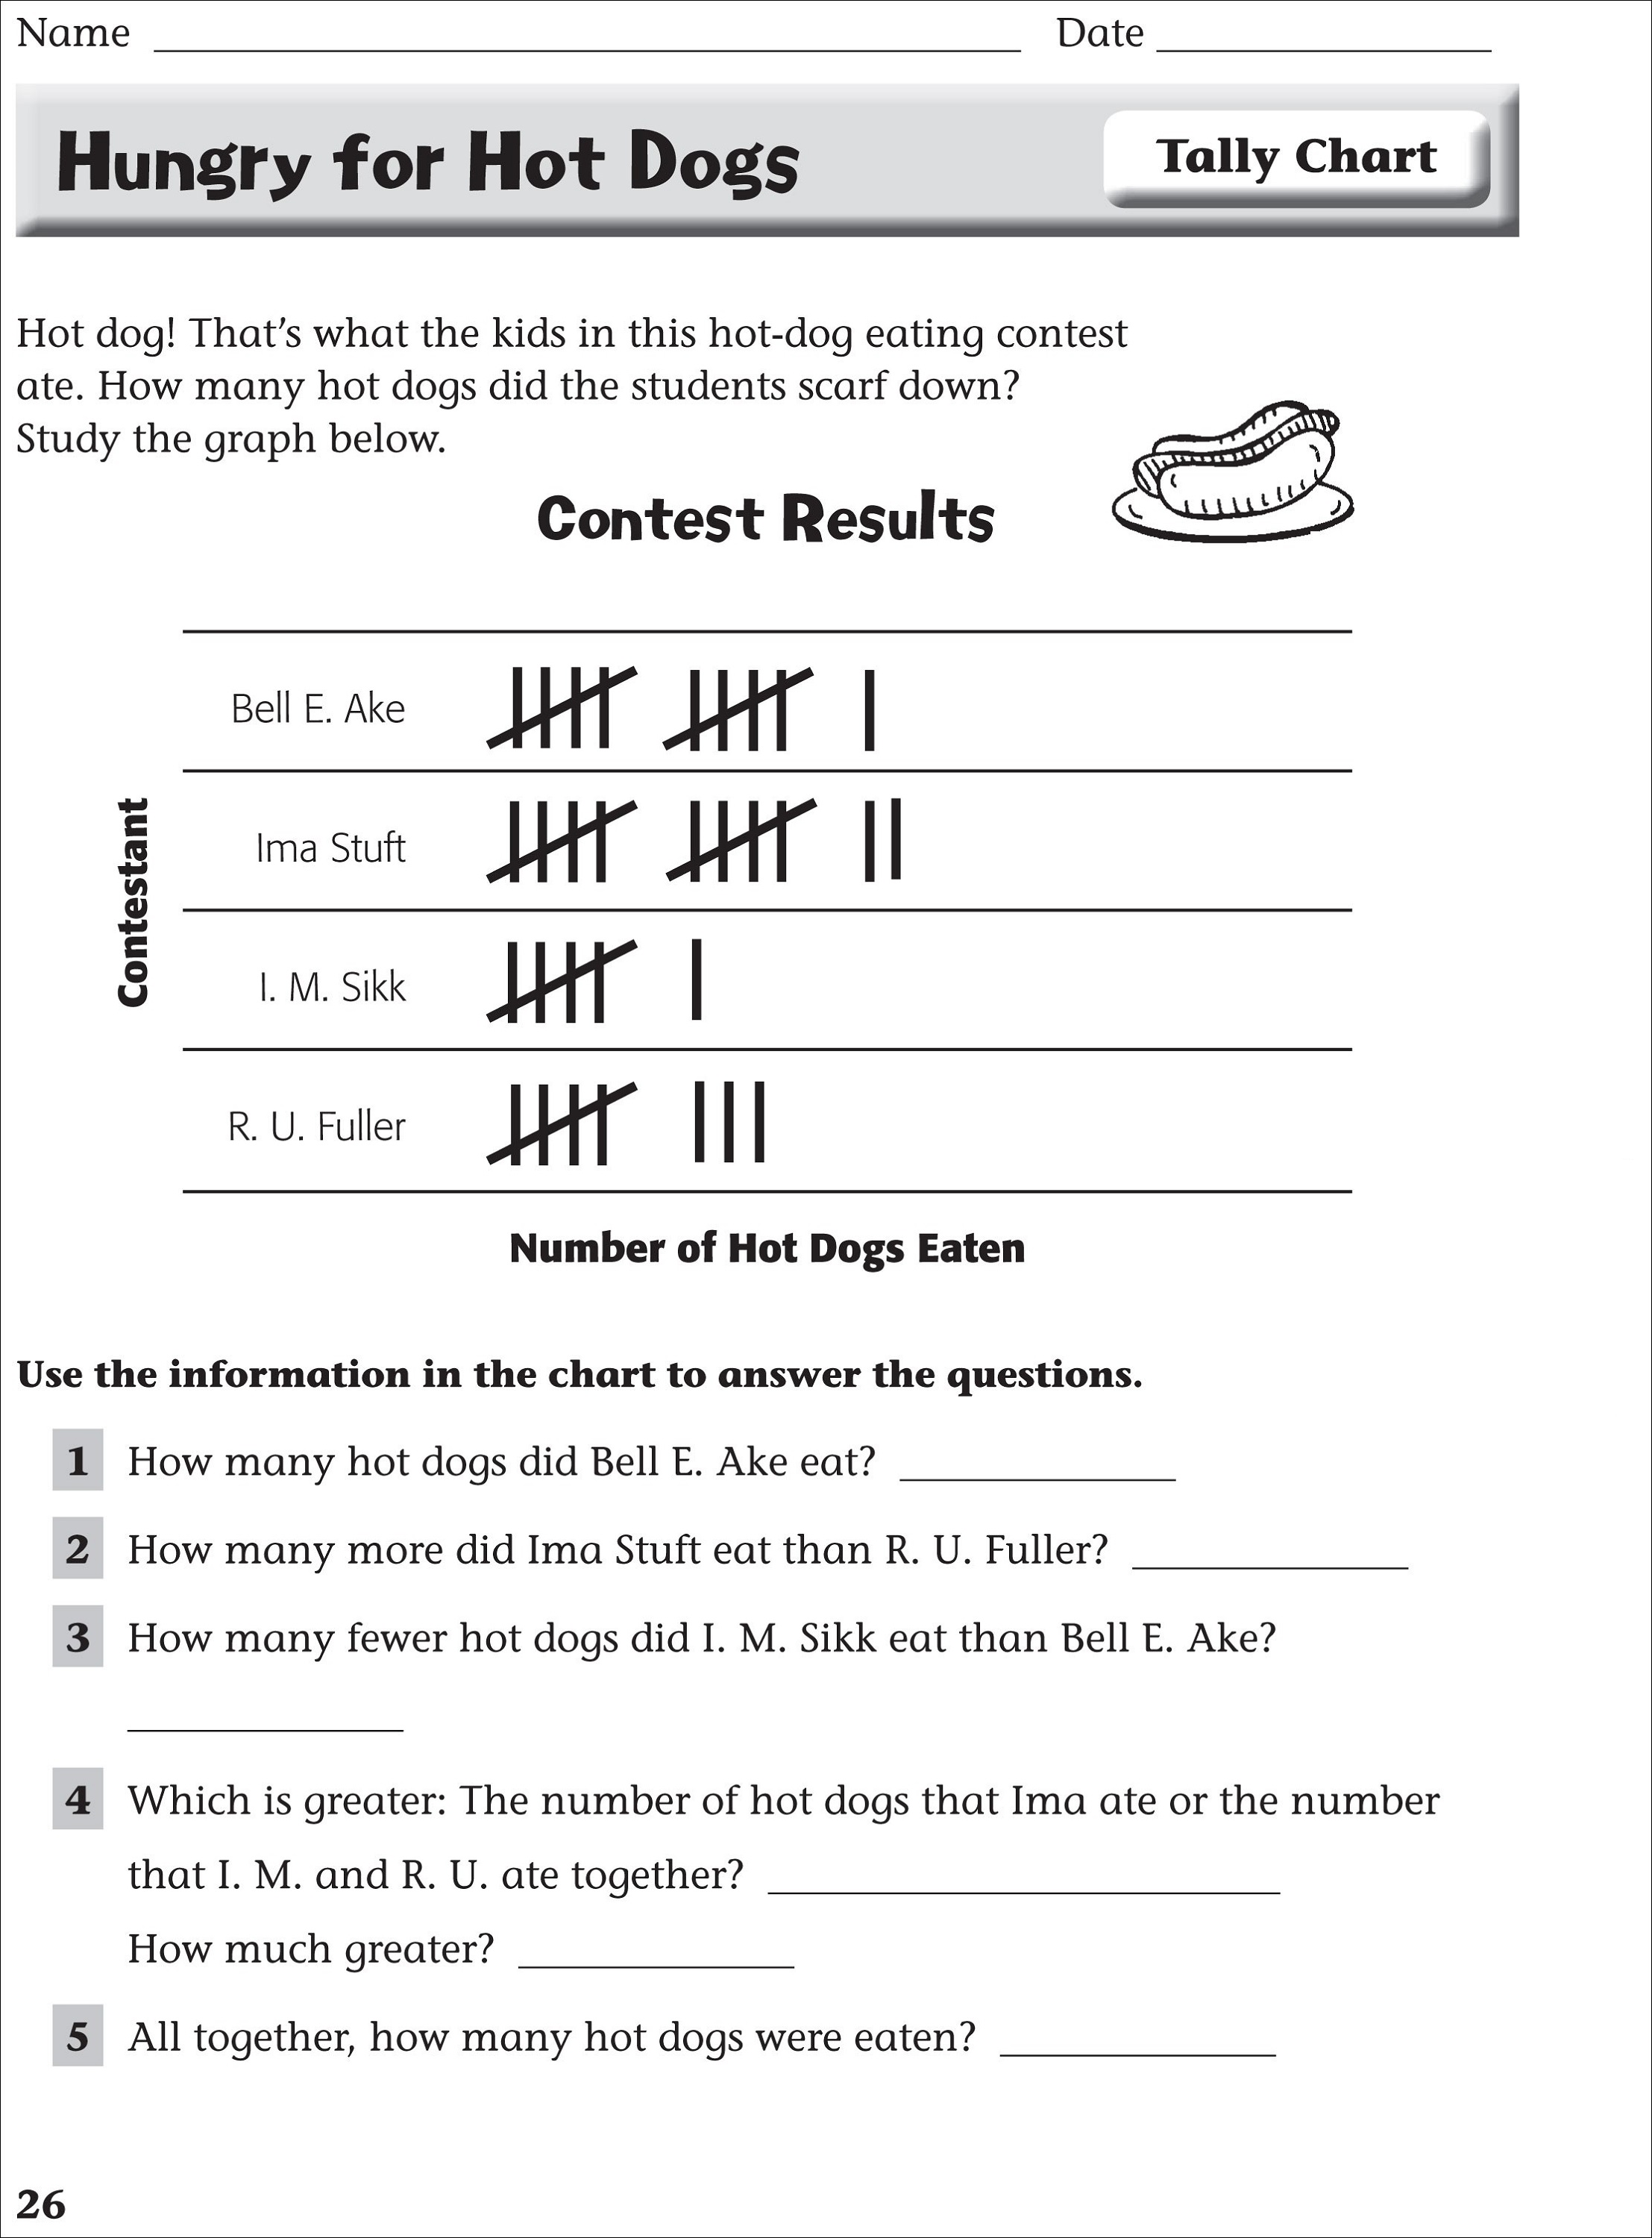 tally charts worksheets for school